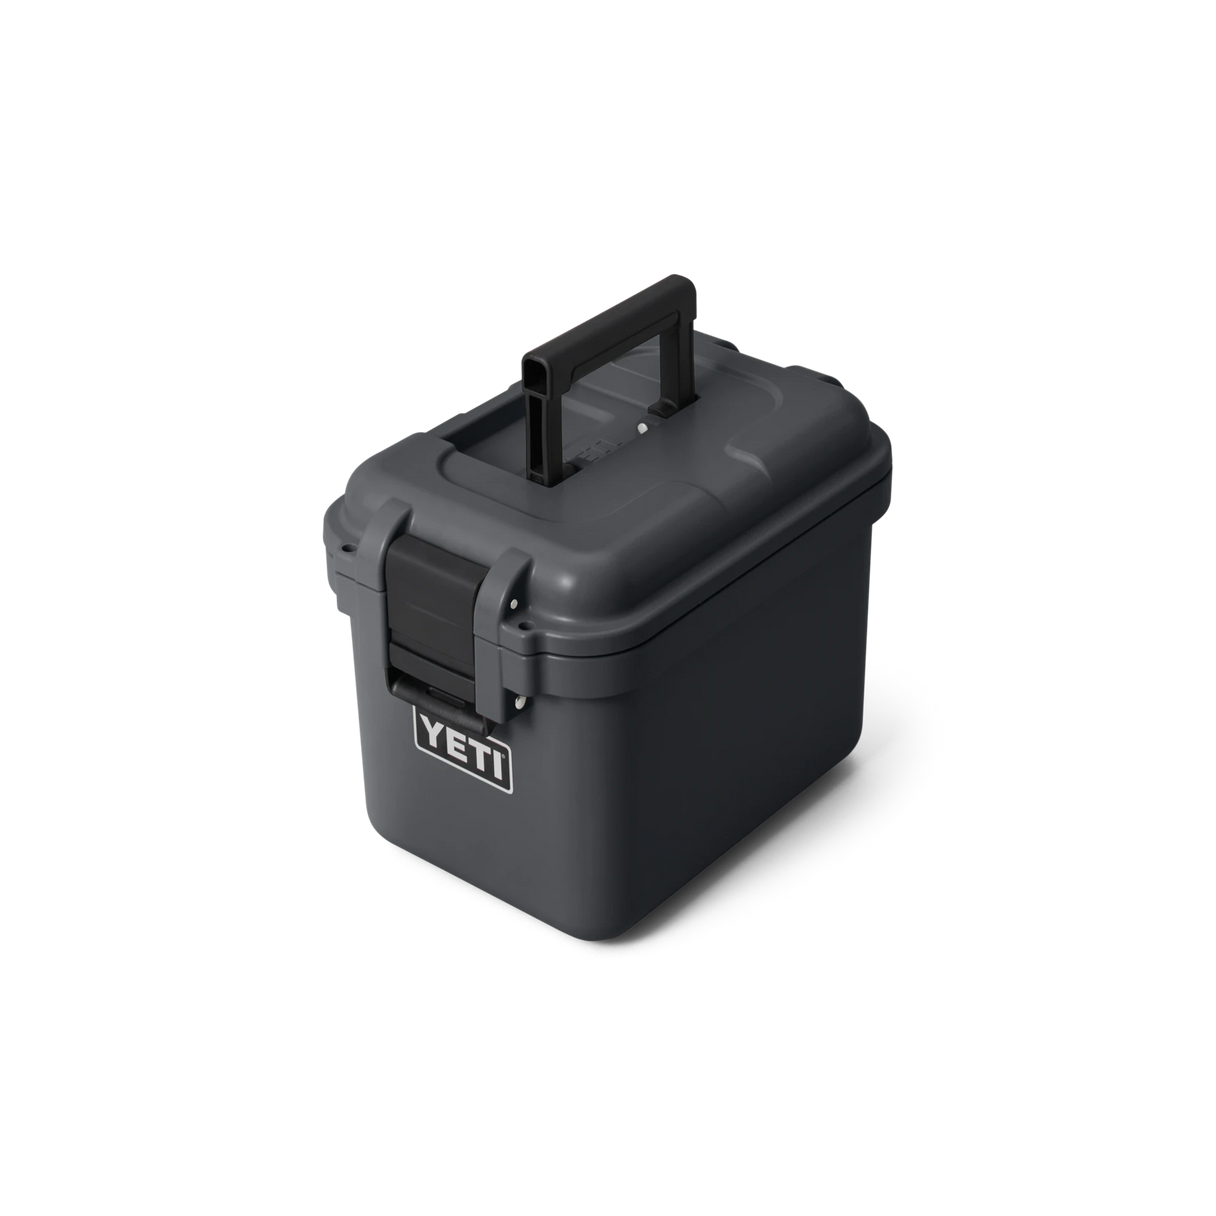 The Yeti LoadOut GoBox Will Keep Your Items Secure, Dry and Organized